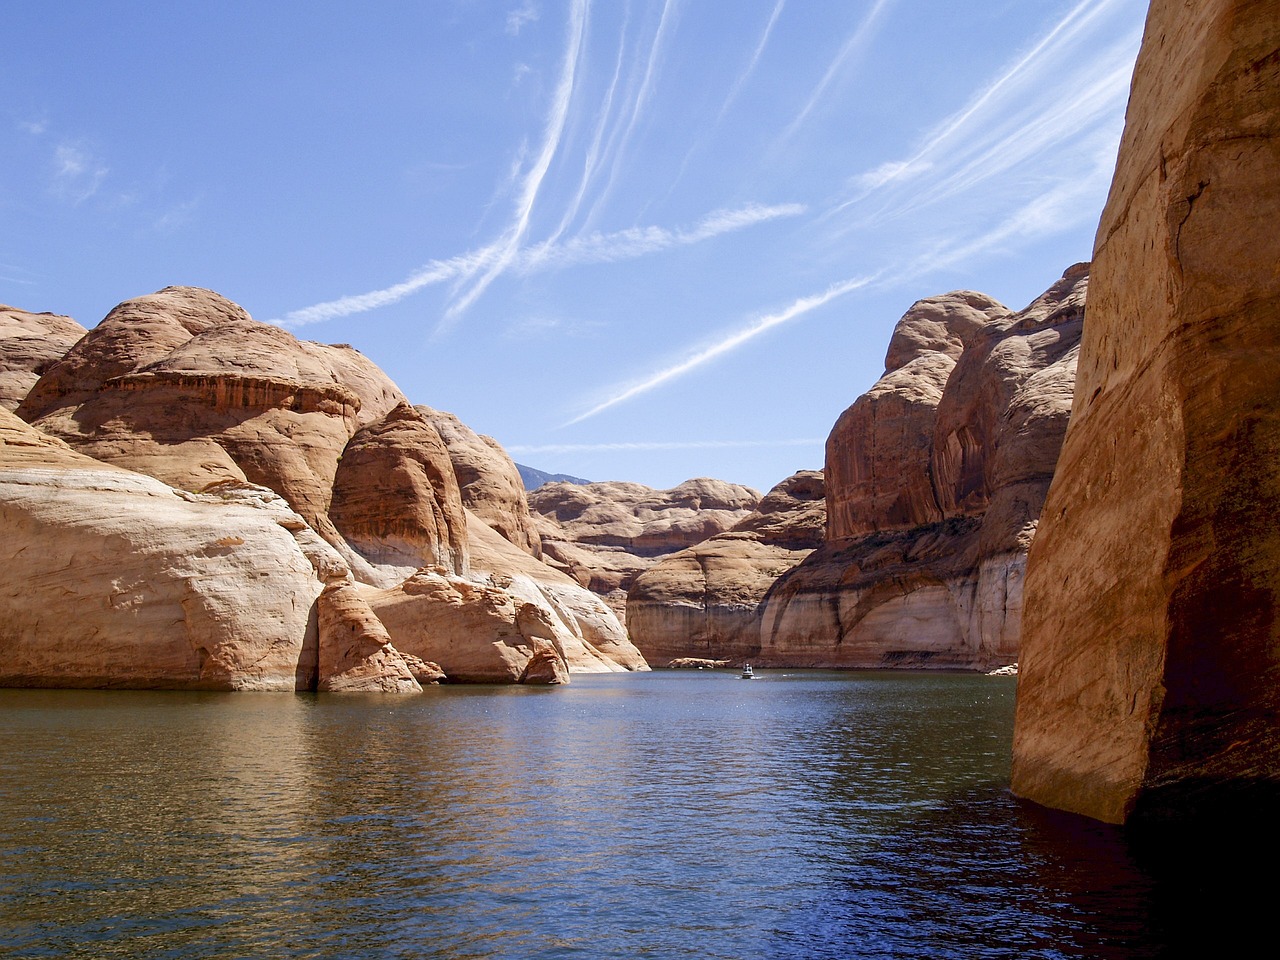 3-Day Adventure at Lake Powell